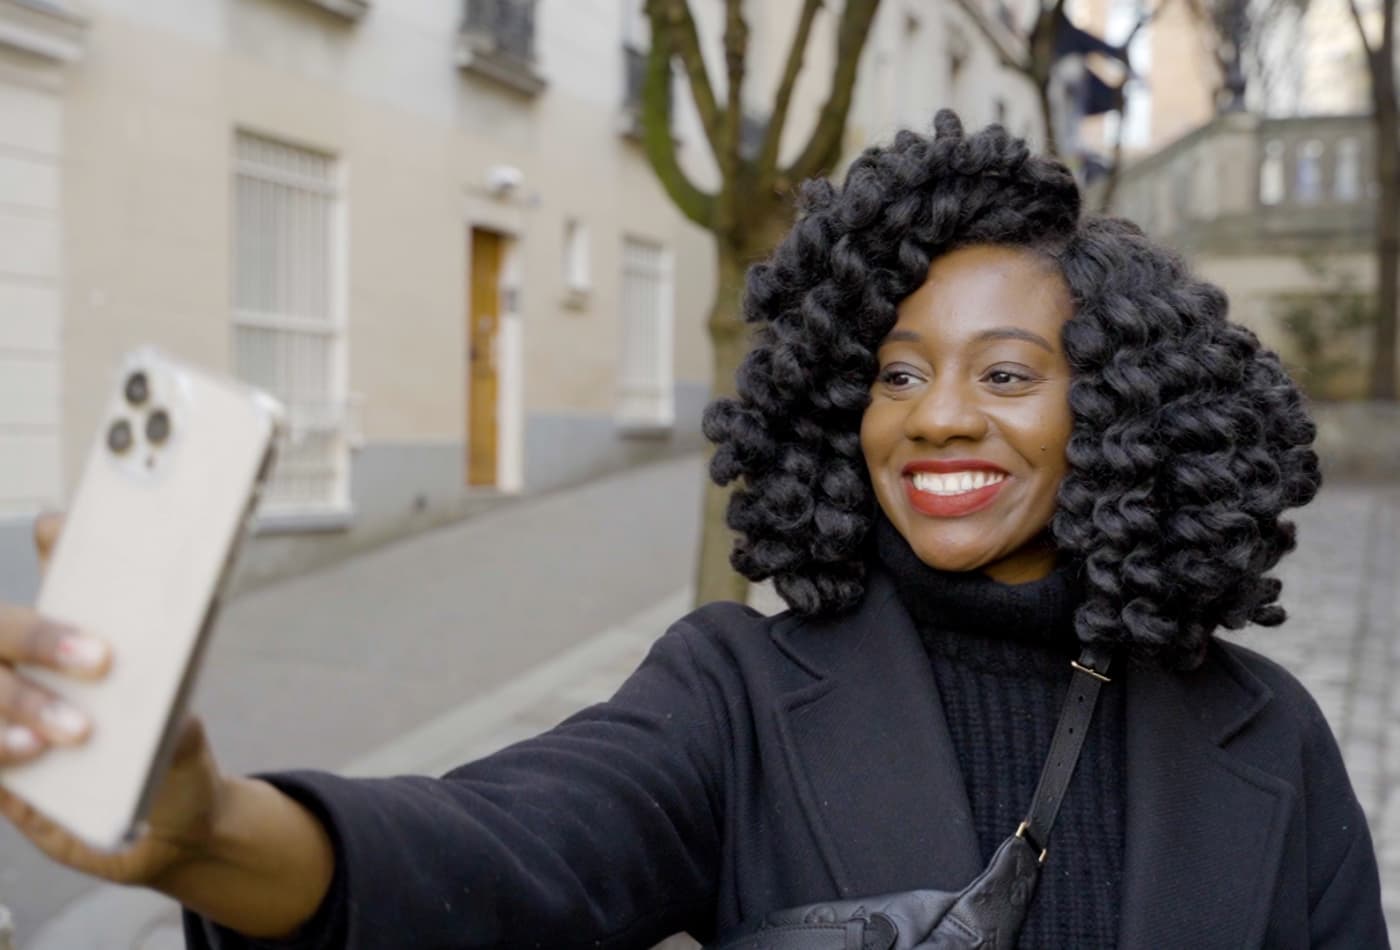 She pays $1,200 per month for a 1-bedroom apartment in Paris — take a look inside